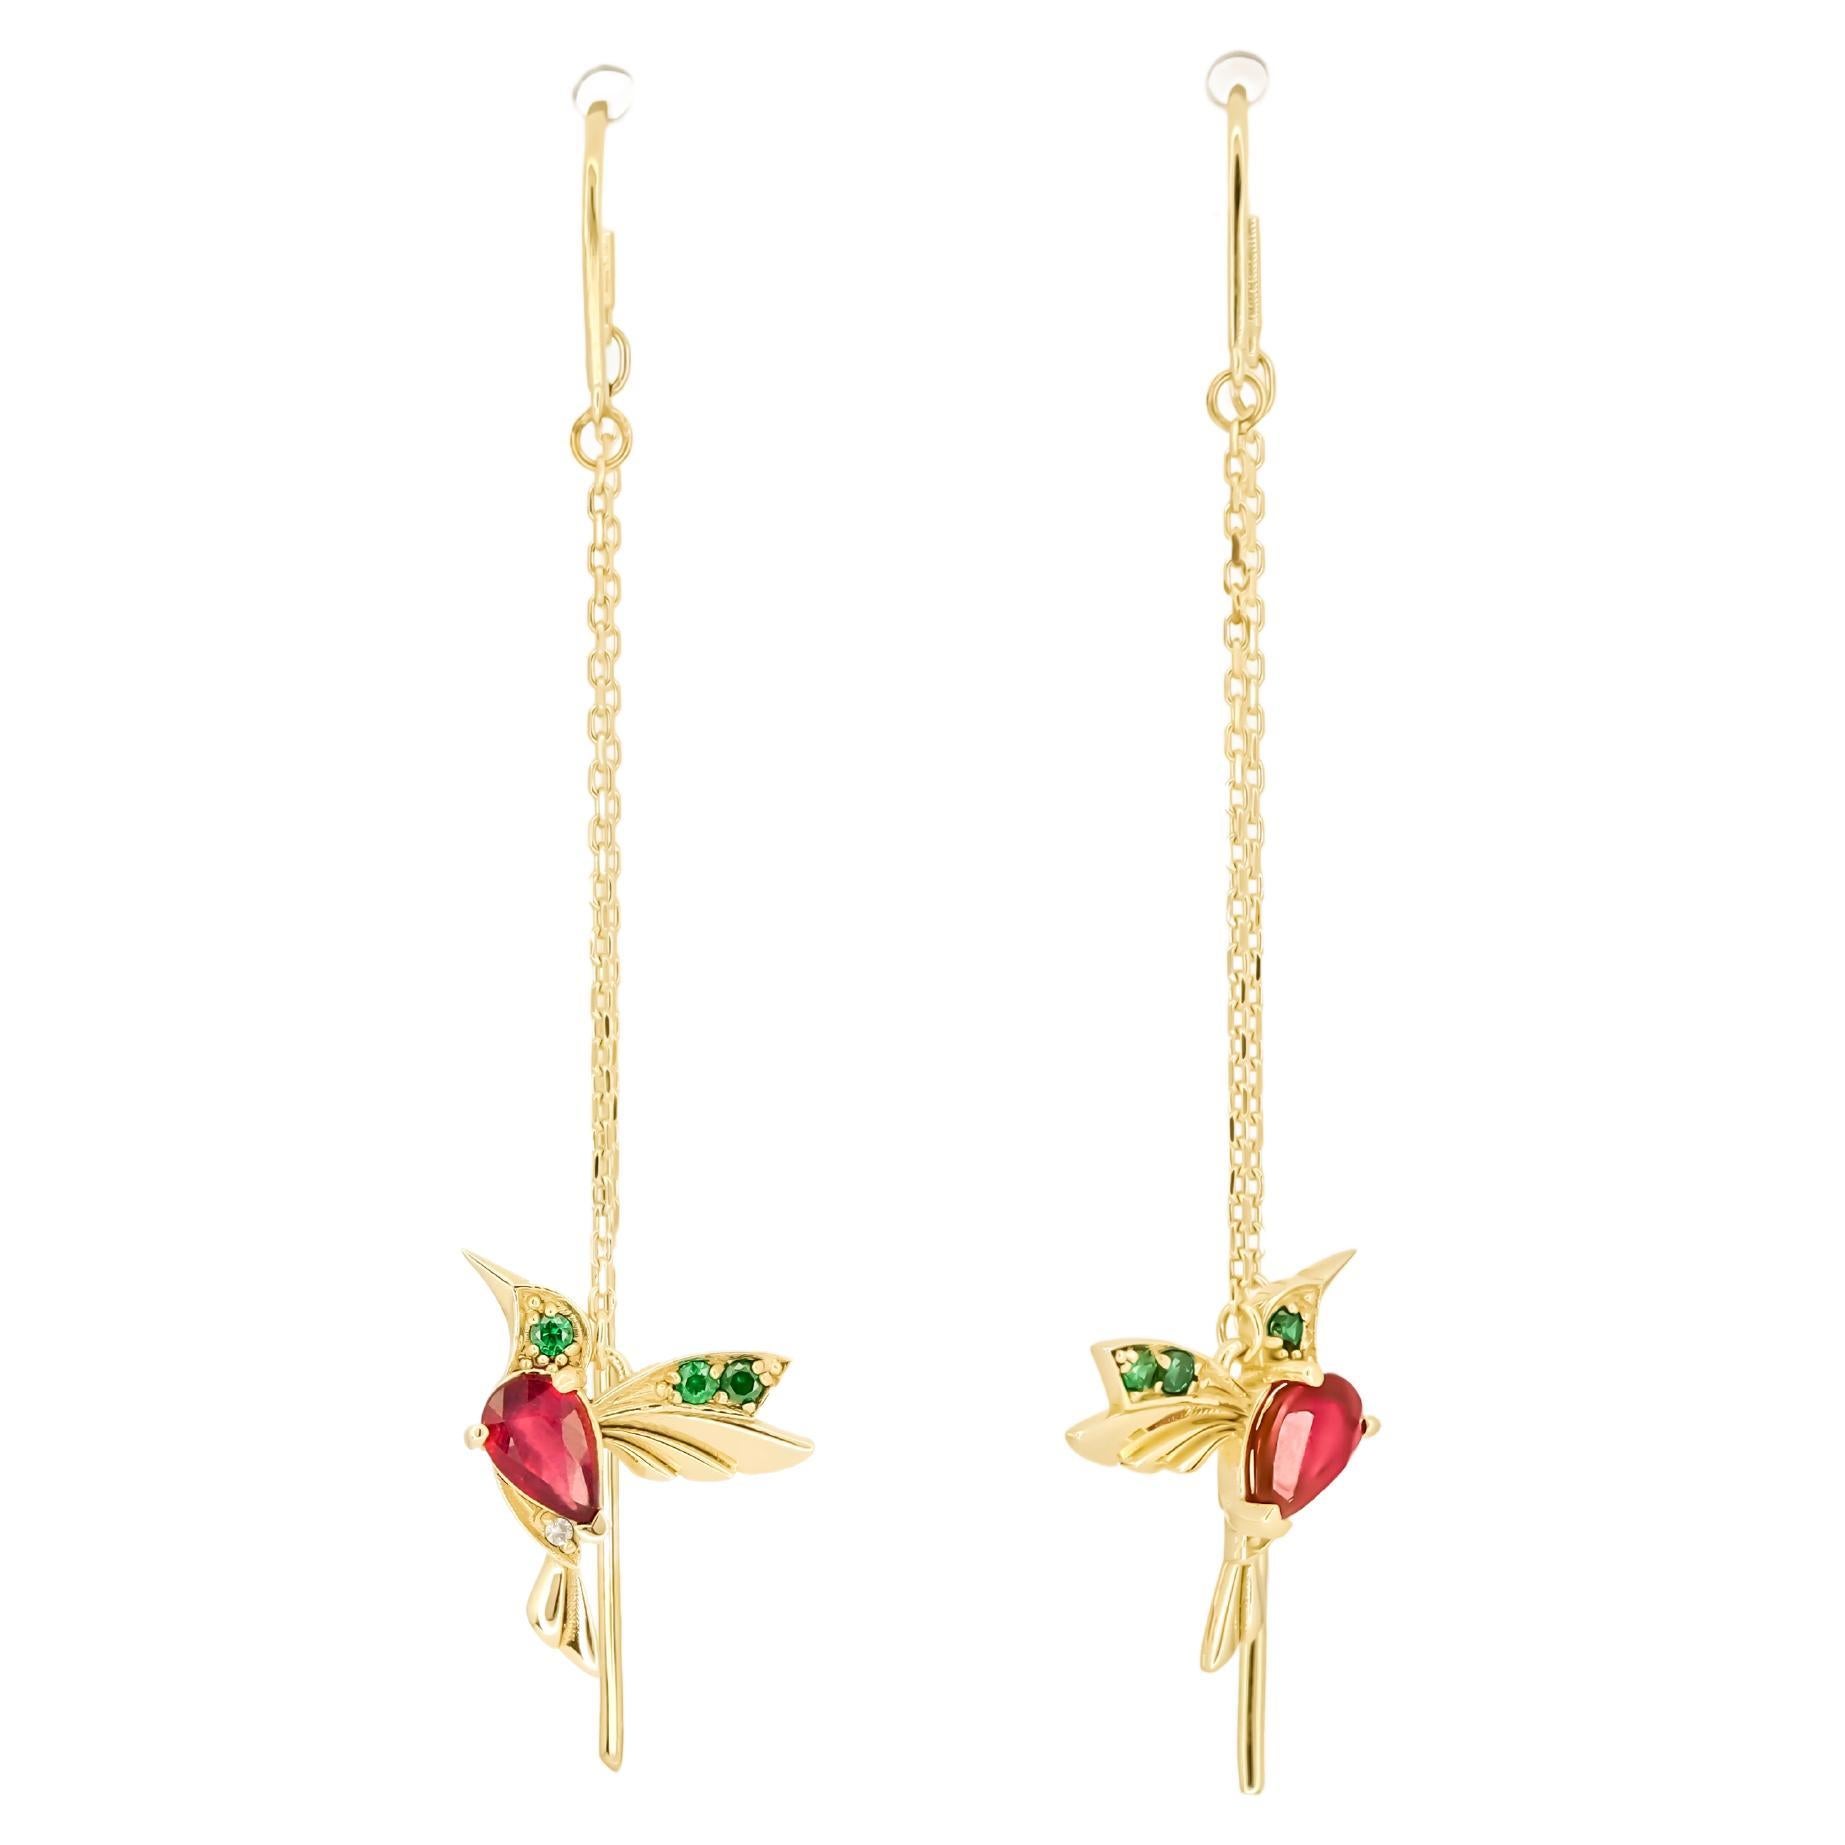 Hummingbird Threader Earrings with Rubies in 14k Gold! For Sale